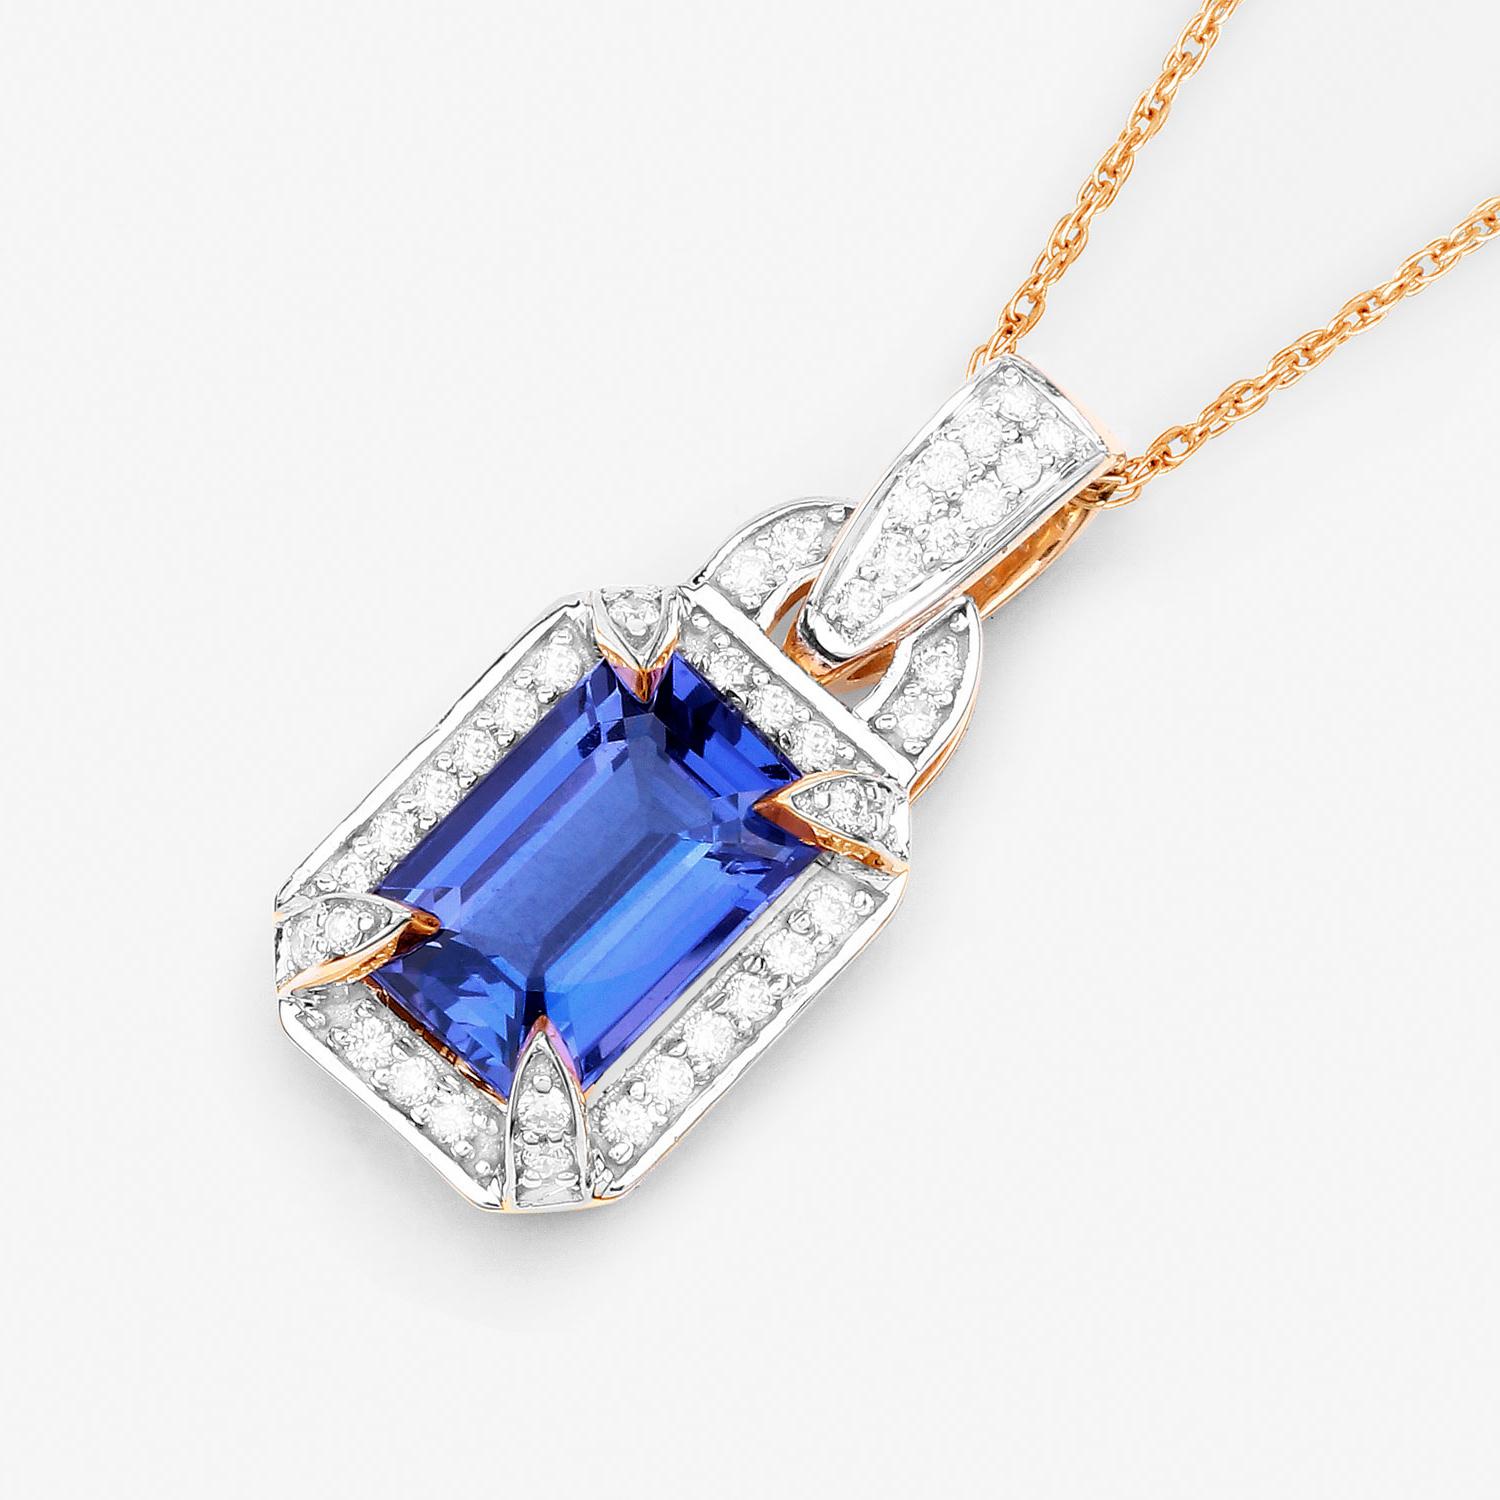 Emerald Cut Tanzanite Necklace With Diamonds 2.09 Carats 14K Yellow Gold For Sale